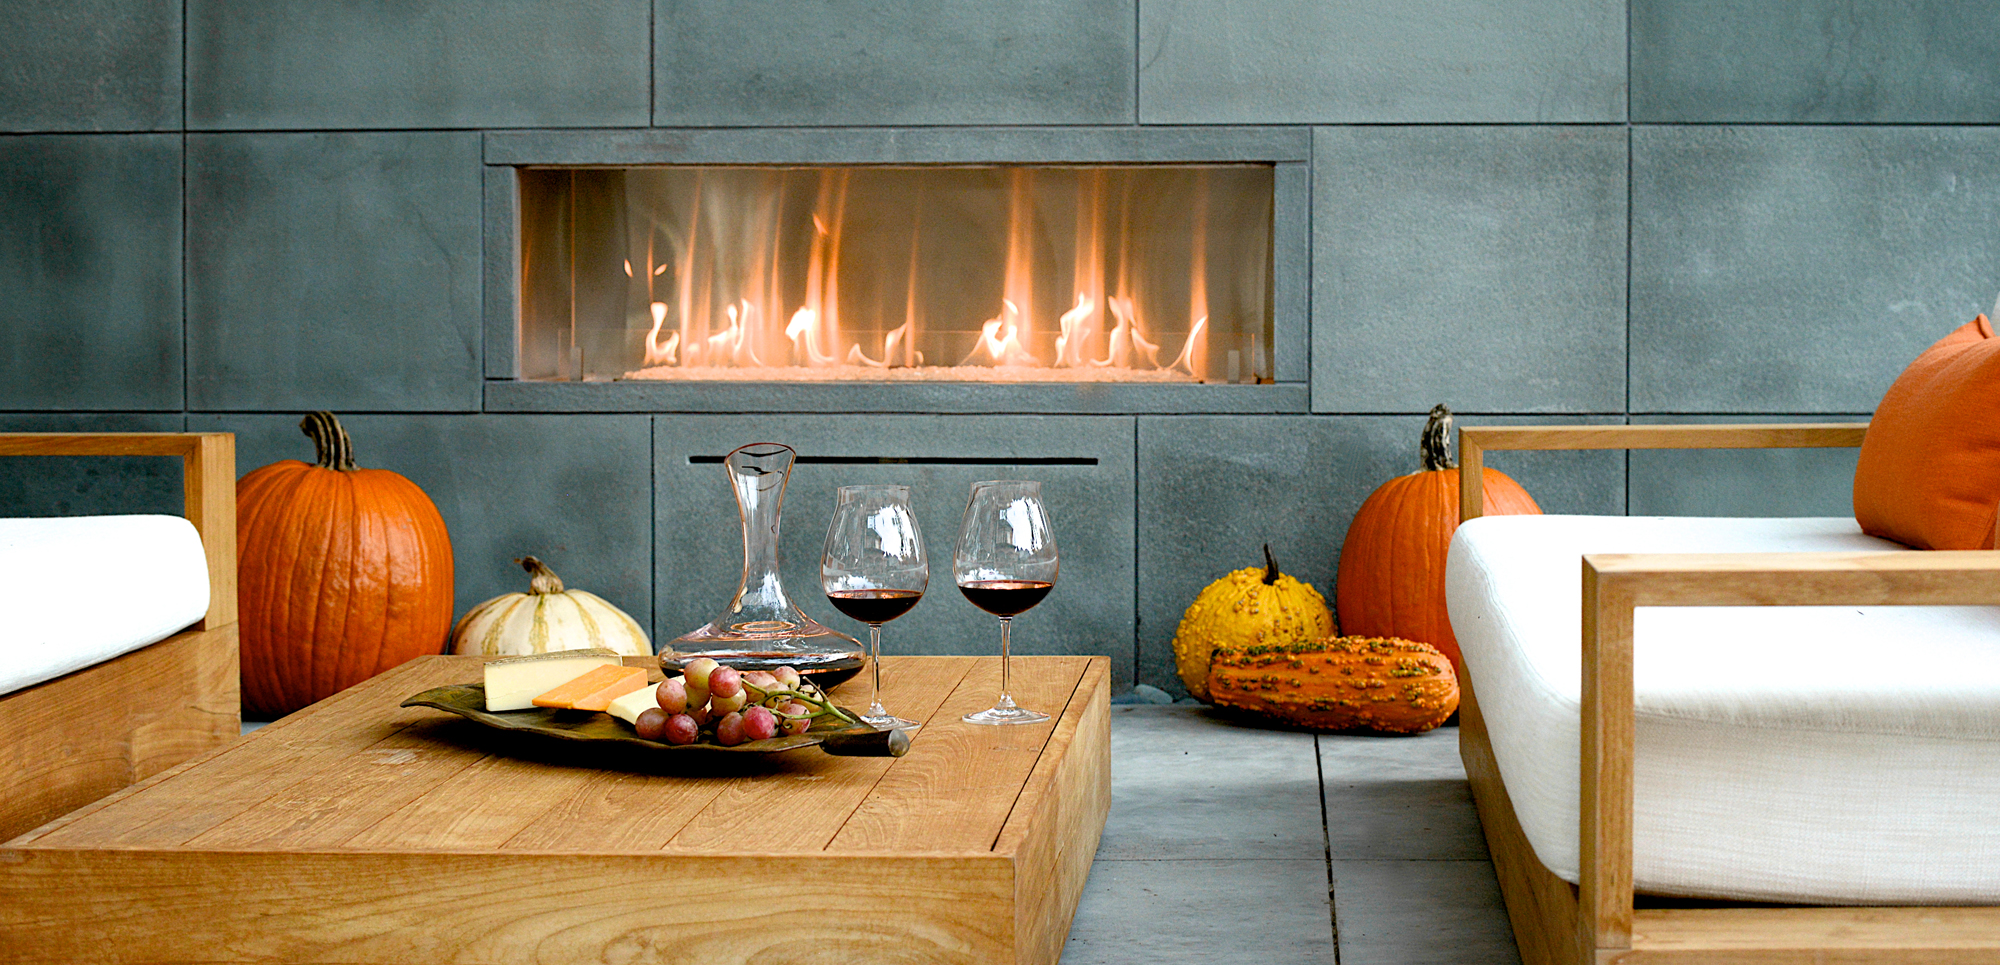 Where to Buy Fireplace Lovely Spark Modern Fires